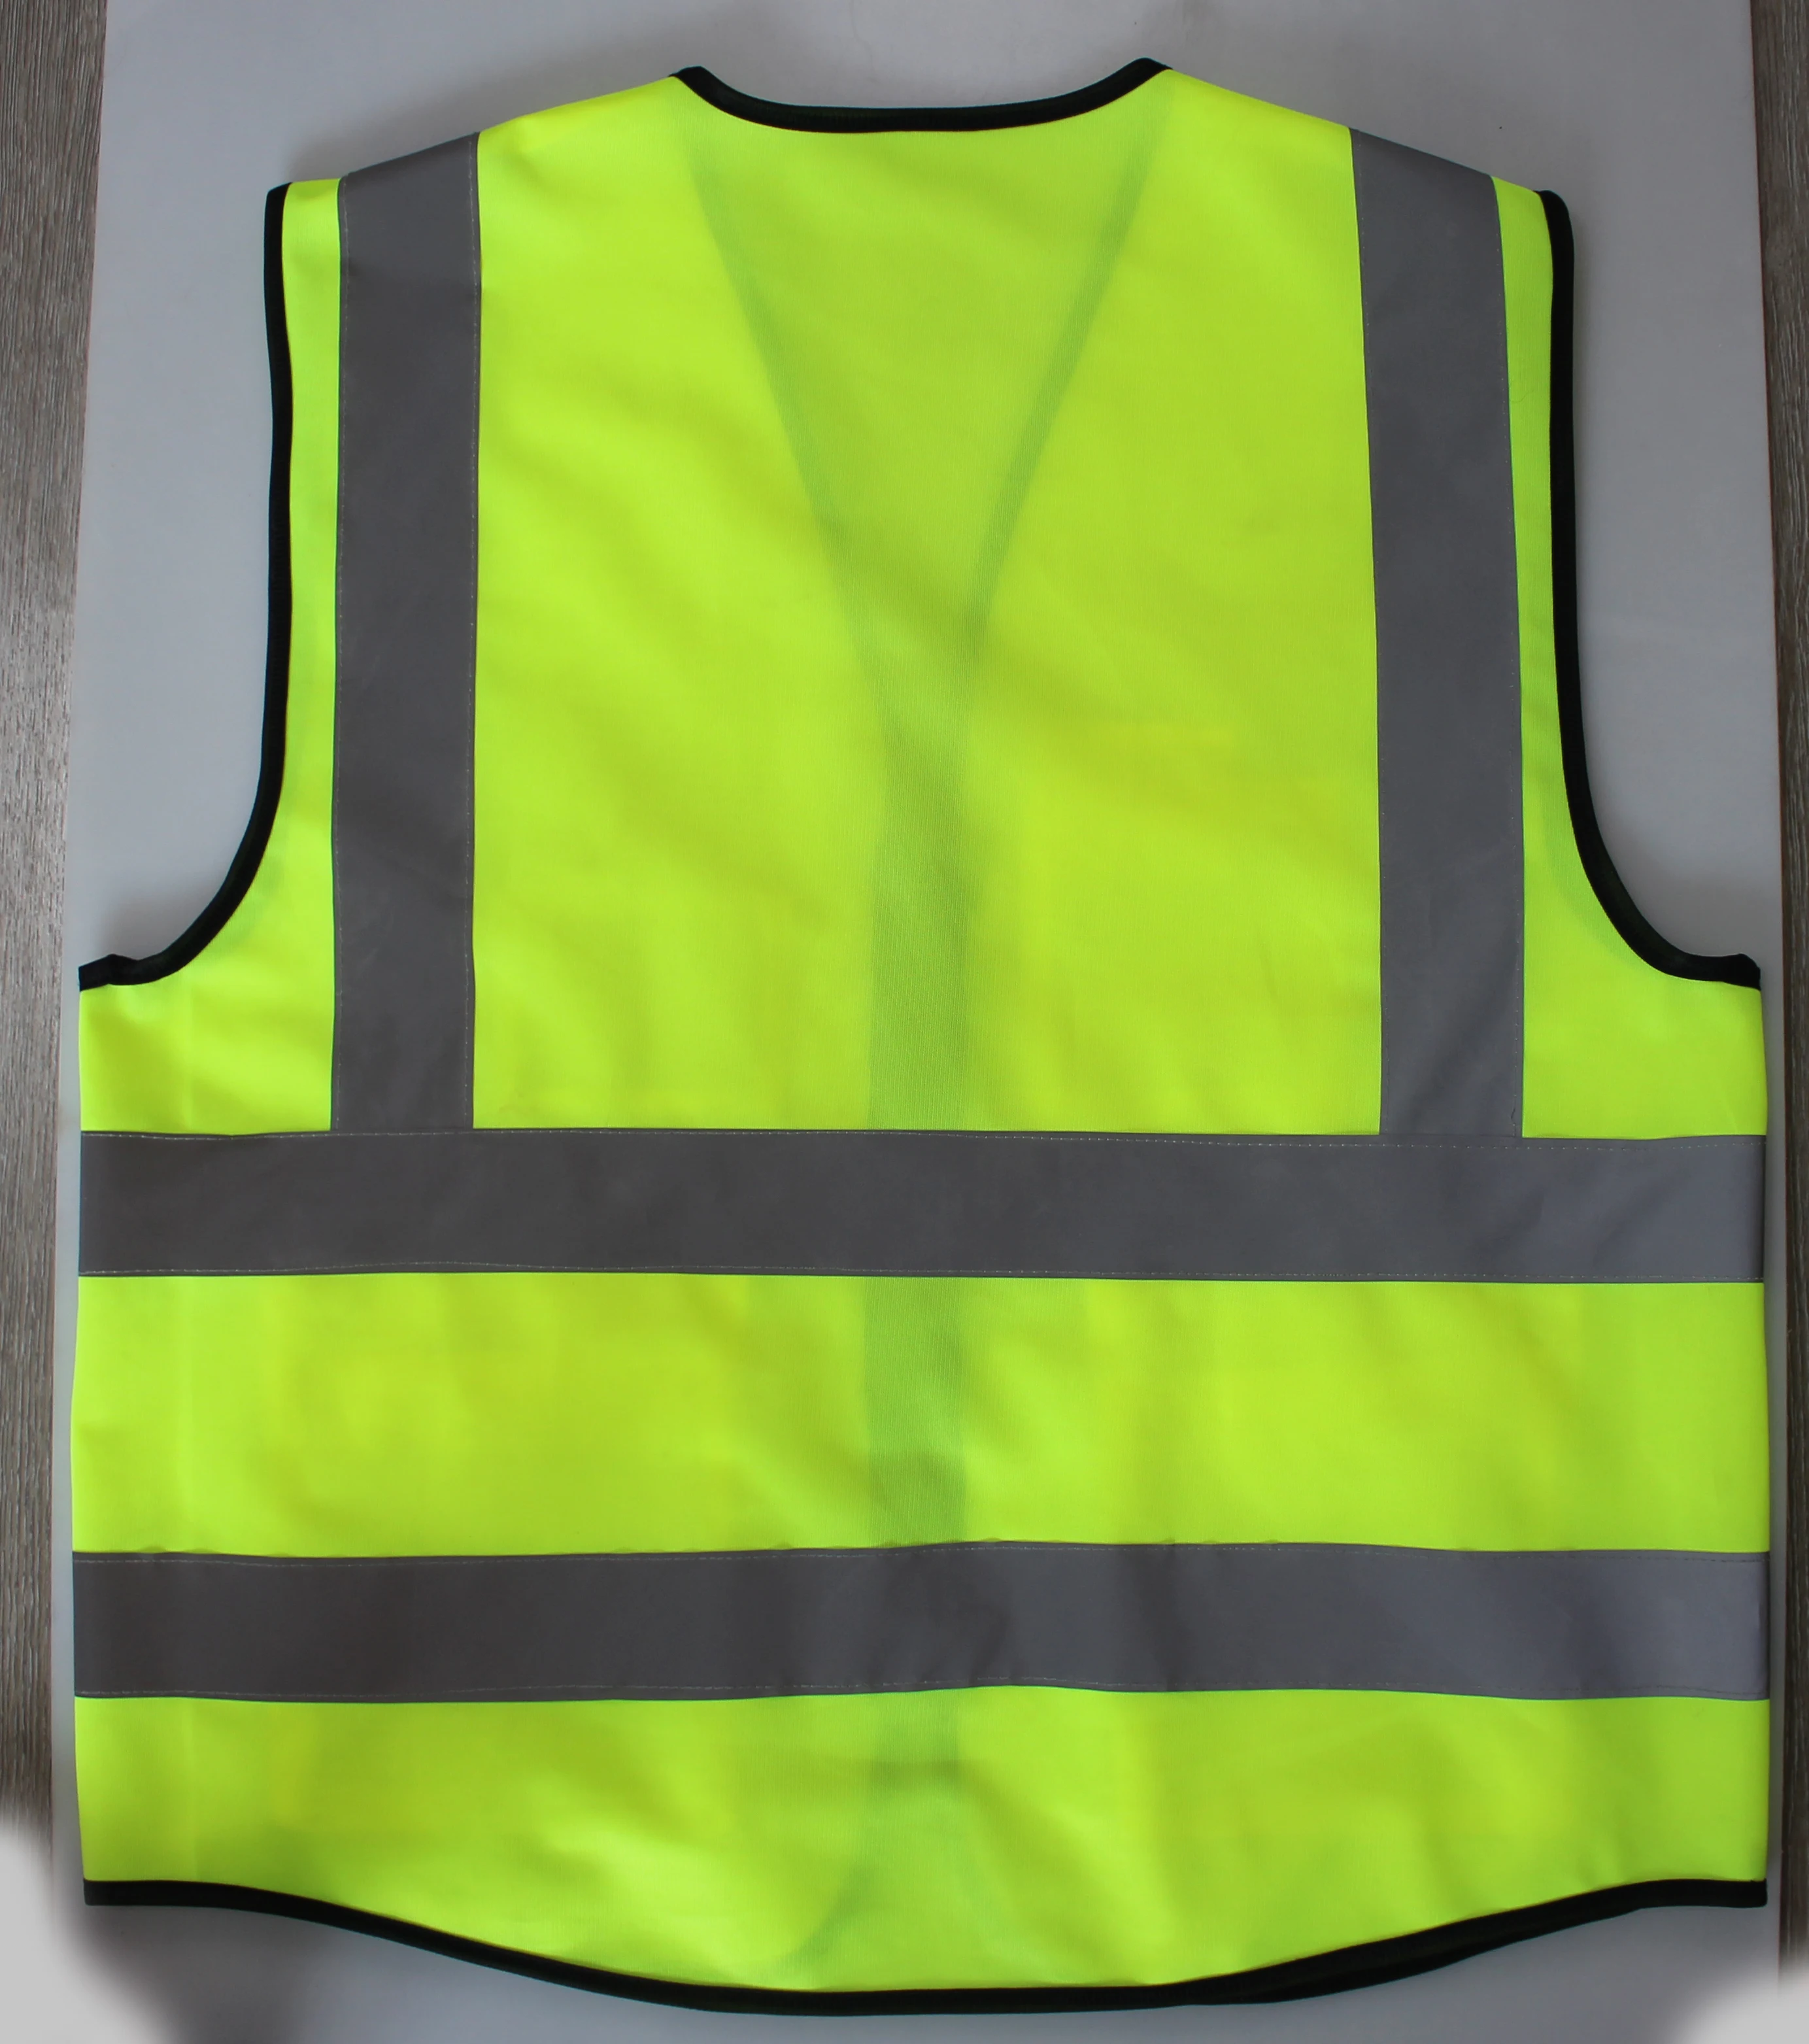 Outdoor Work High Visibility reflective safety vests Traffic Construction Vest With multi Pockets and Zipper